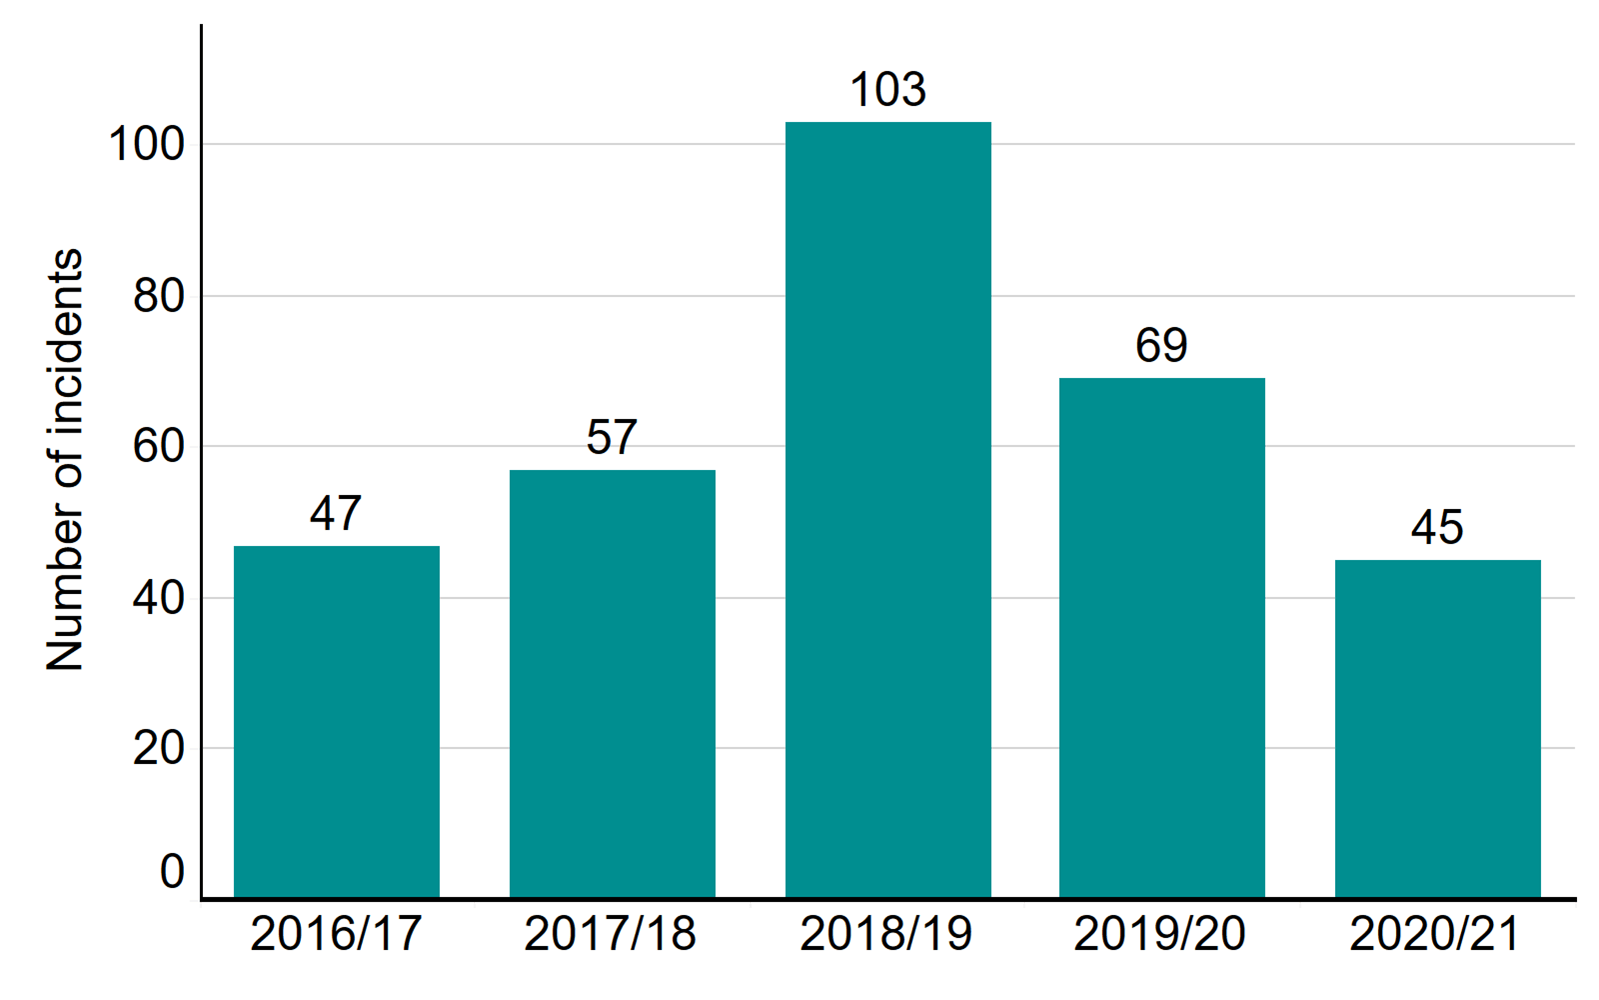 Figure 5: Number of severe OHSS incidents reported, 2016/17-2020/21. Number of severe OHSS incidents reported, 2016/17-2020/21. This bar chart shows the number of severe OHSS incidents reported, from 2016/17 to 2020/2021. The number of severe OHSS incidents had increased from 47 in 2016/17 to 103 in 2018/19. Since then, there has been a decrease in the number of severe OHSS incidents to 45 in 2020/21. An accessible form of the underlying data for this figure can be downloaded at the start of the report in .xls format.